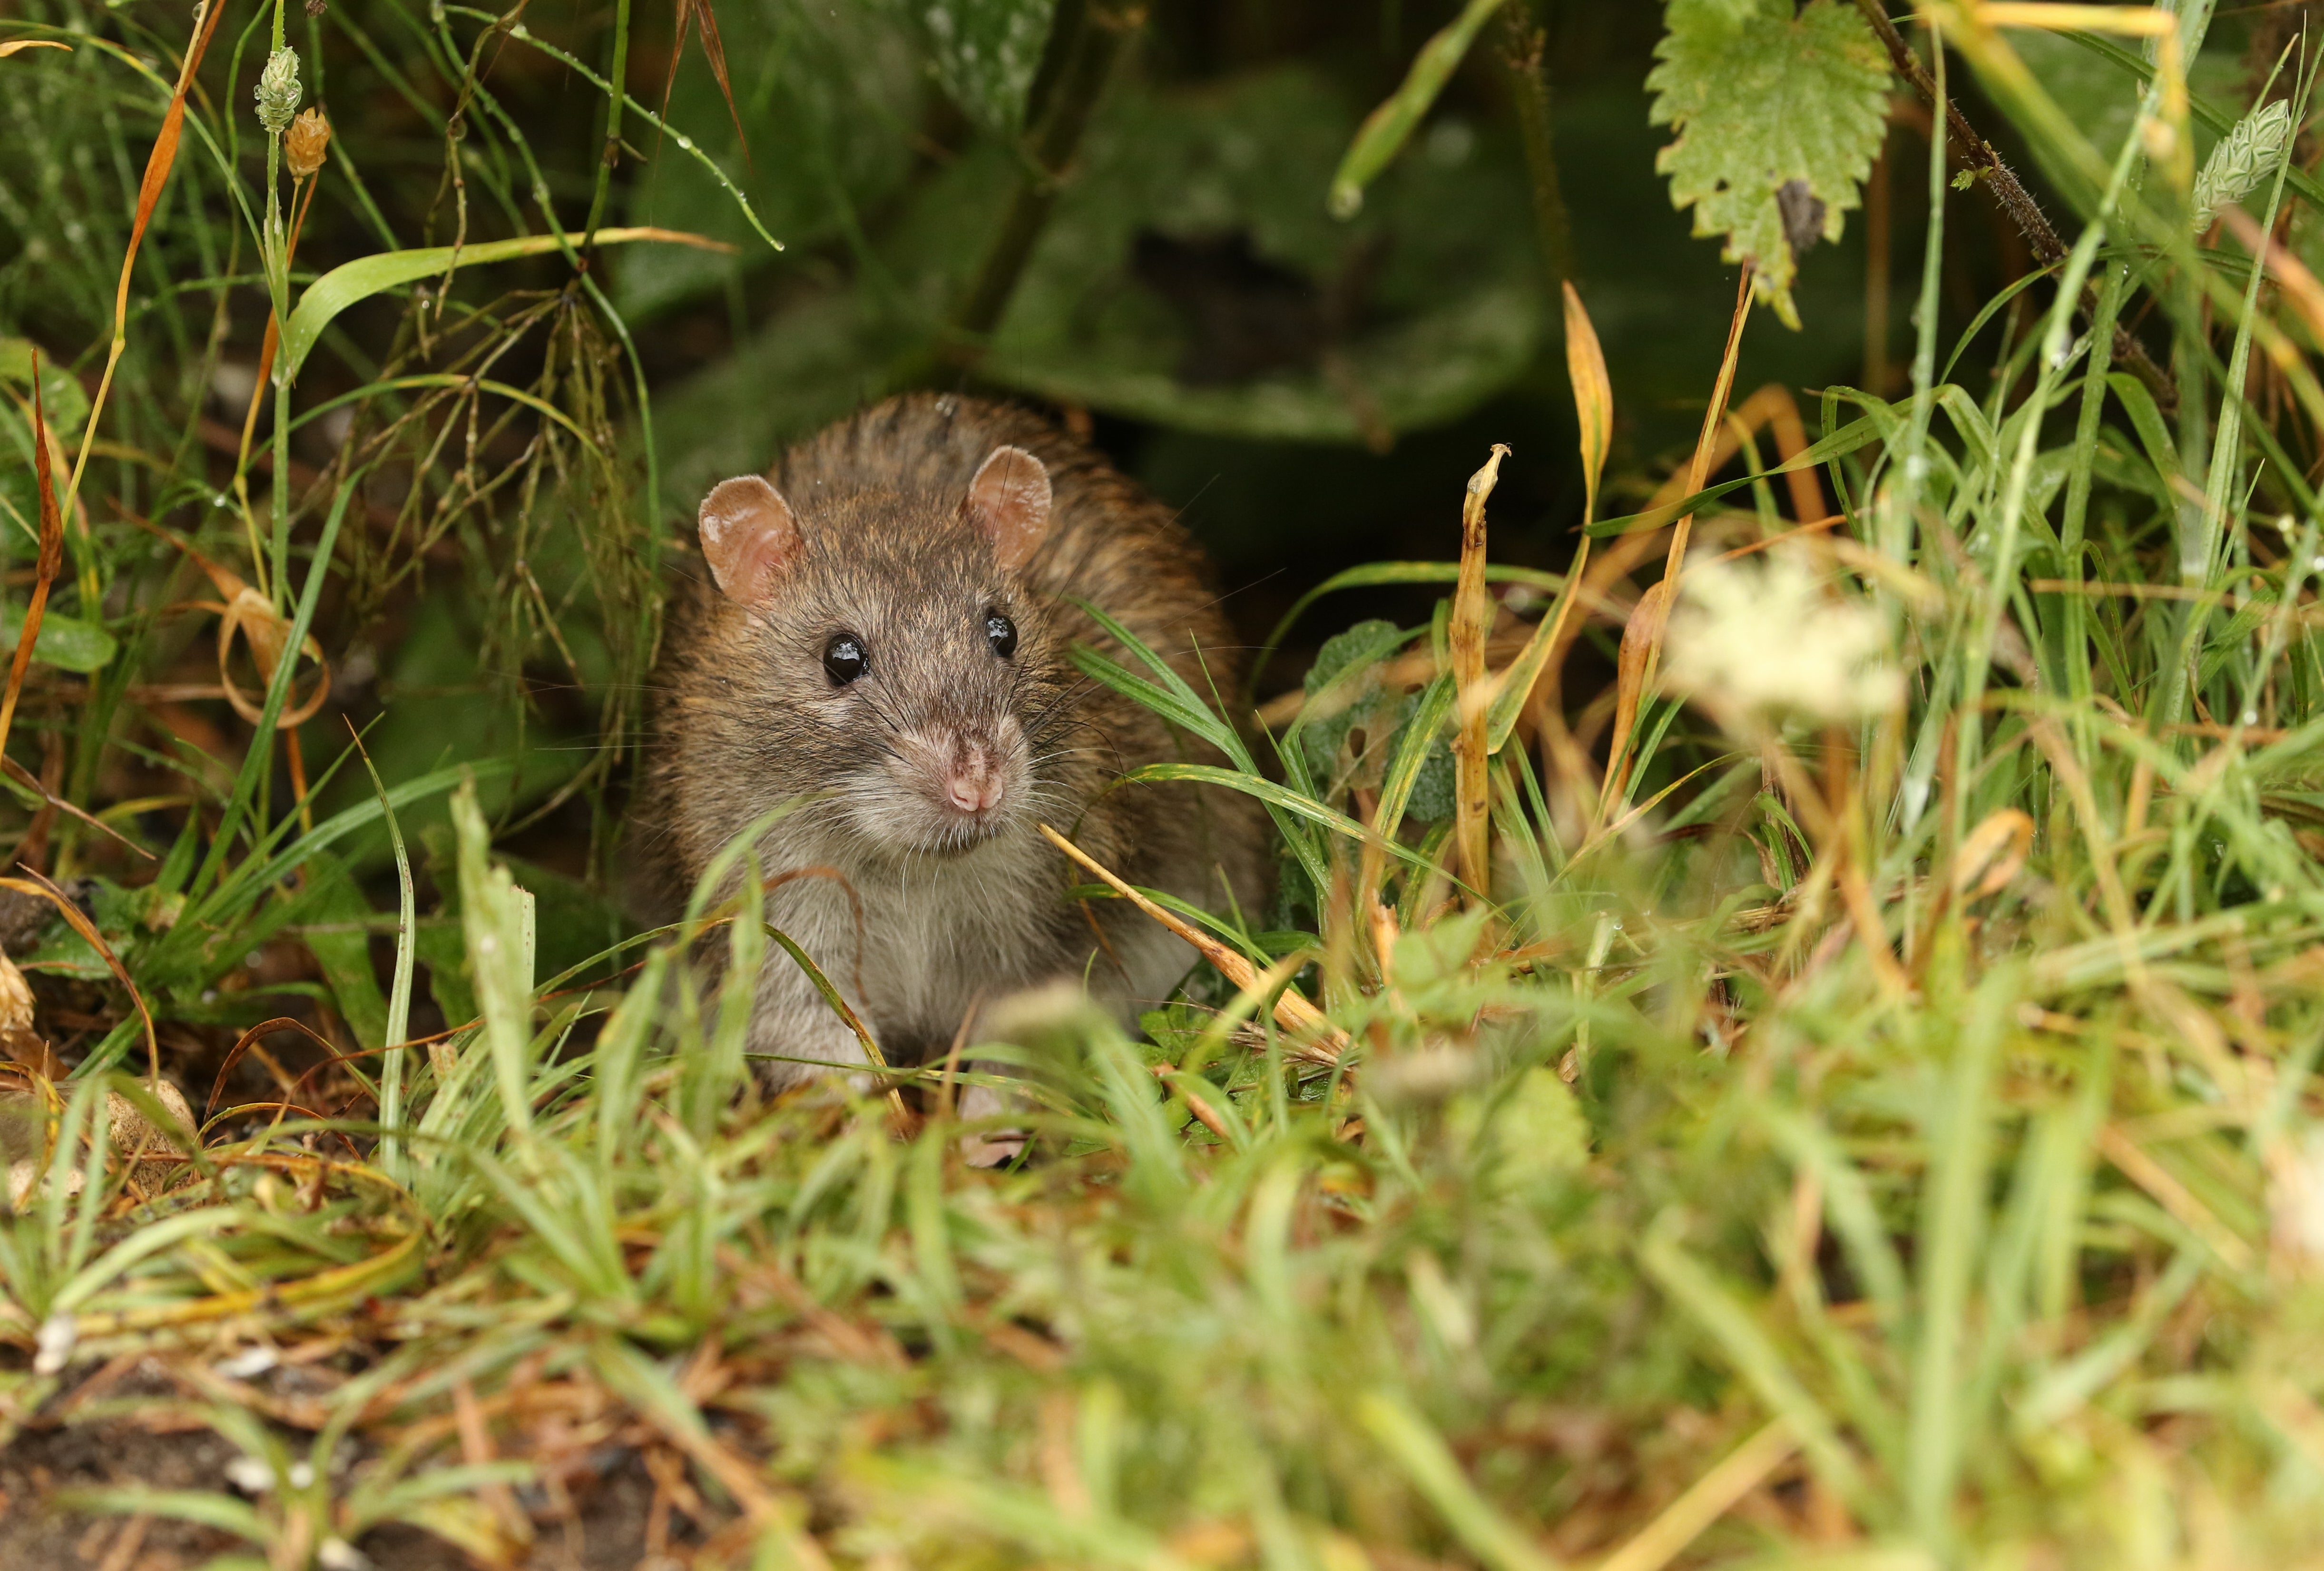 Rats Are Finally Gone from This Vulnerable Island